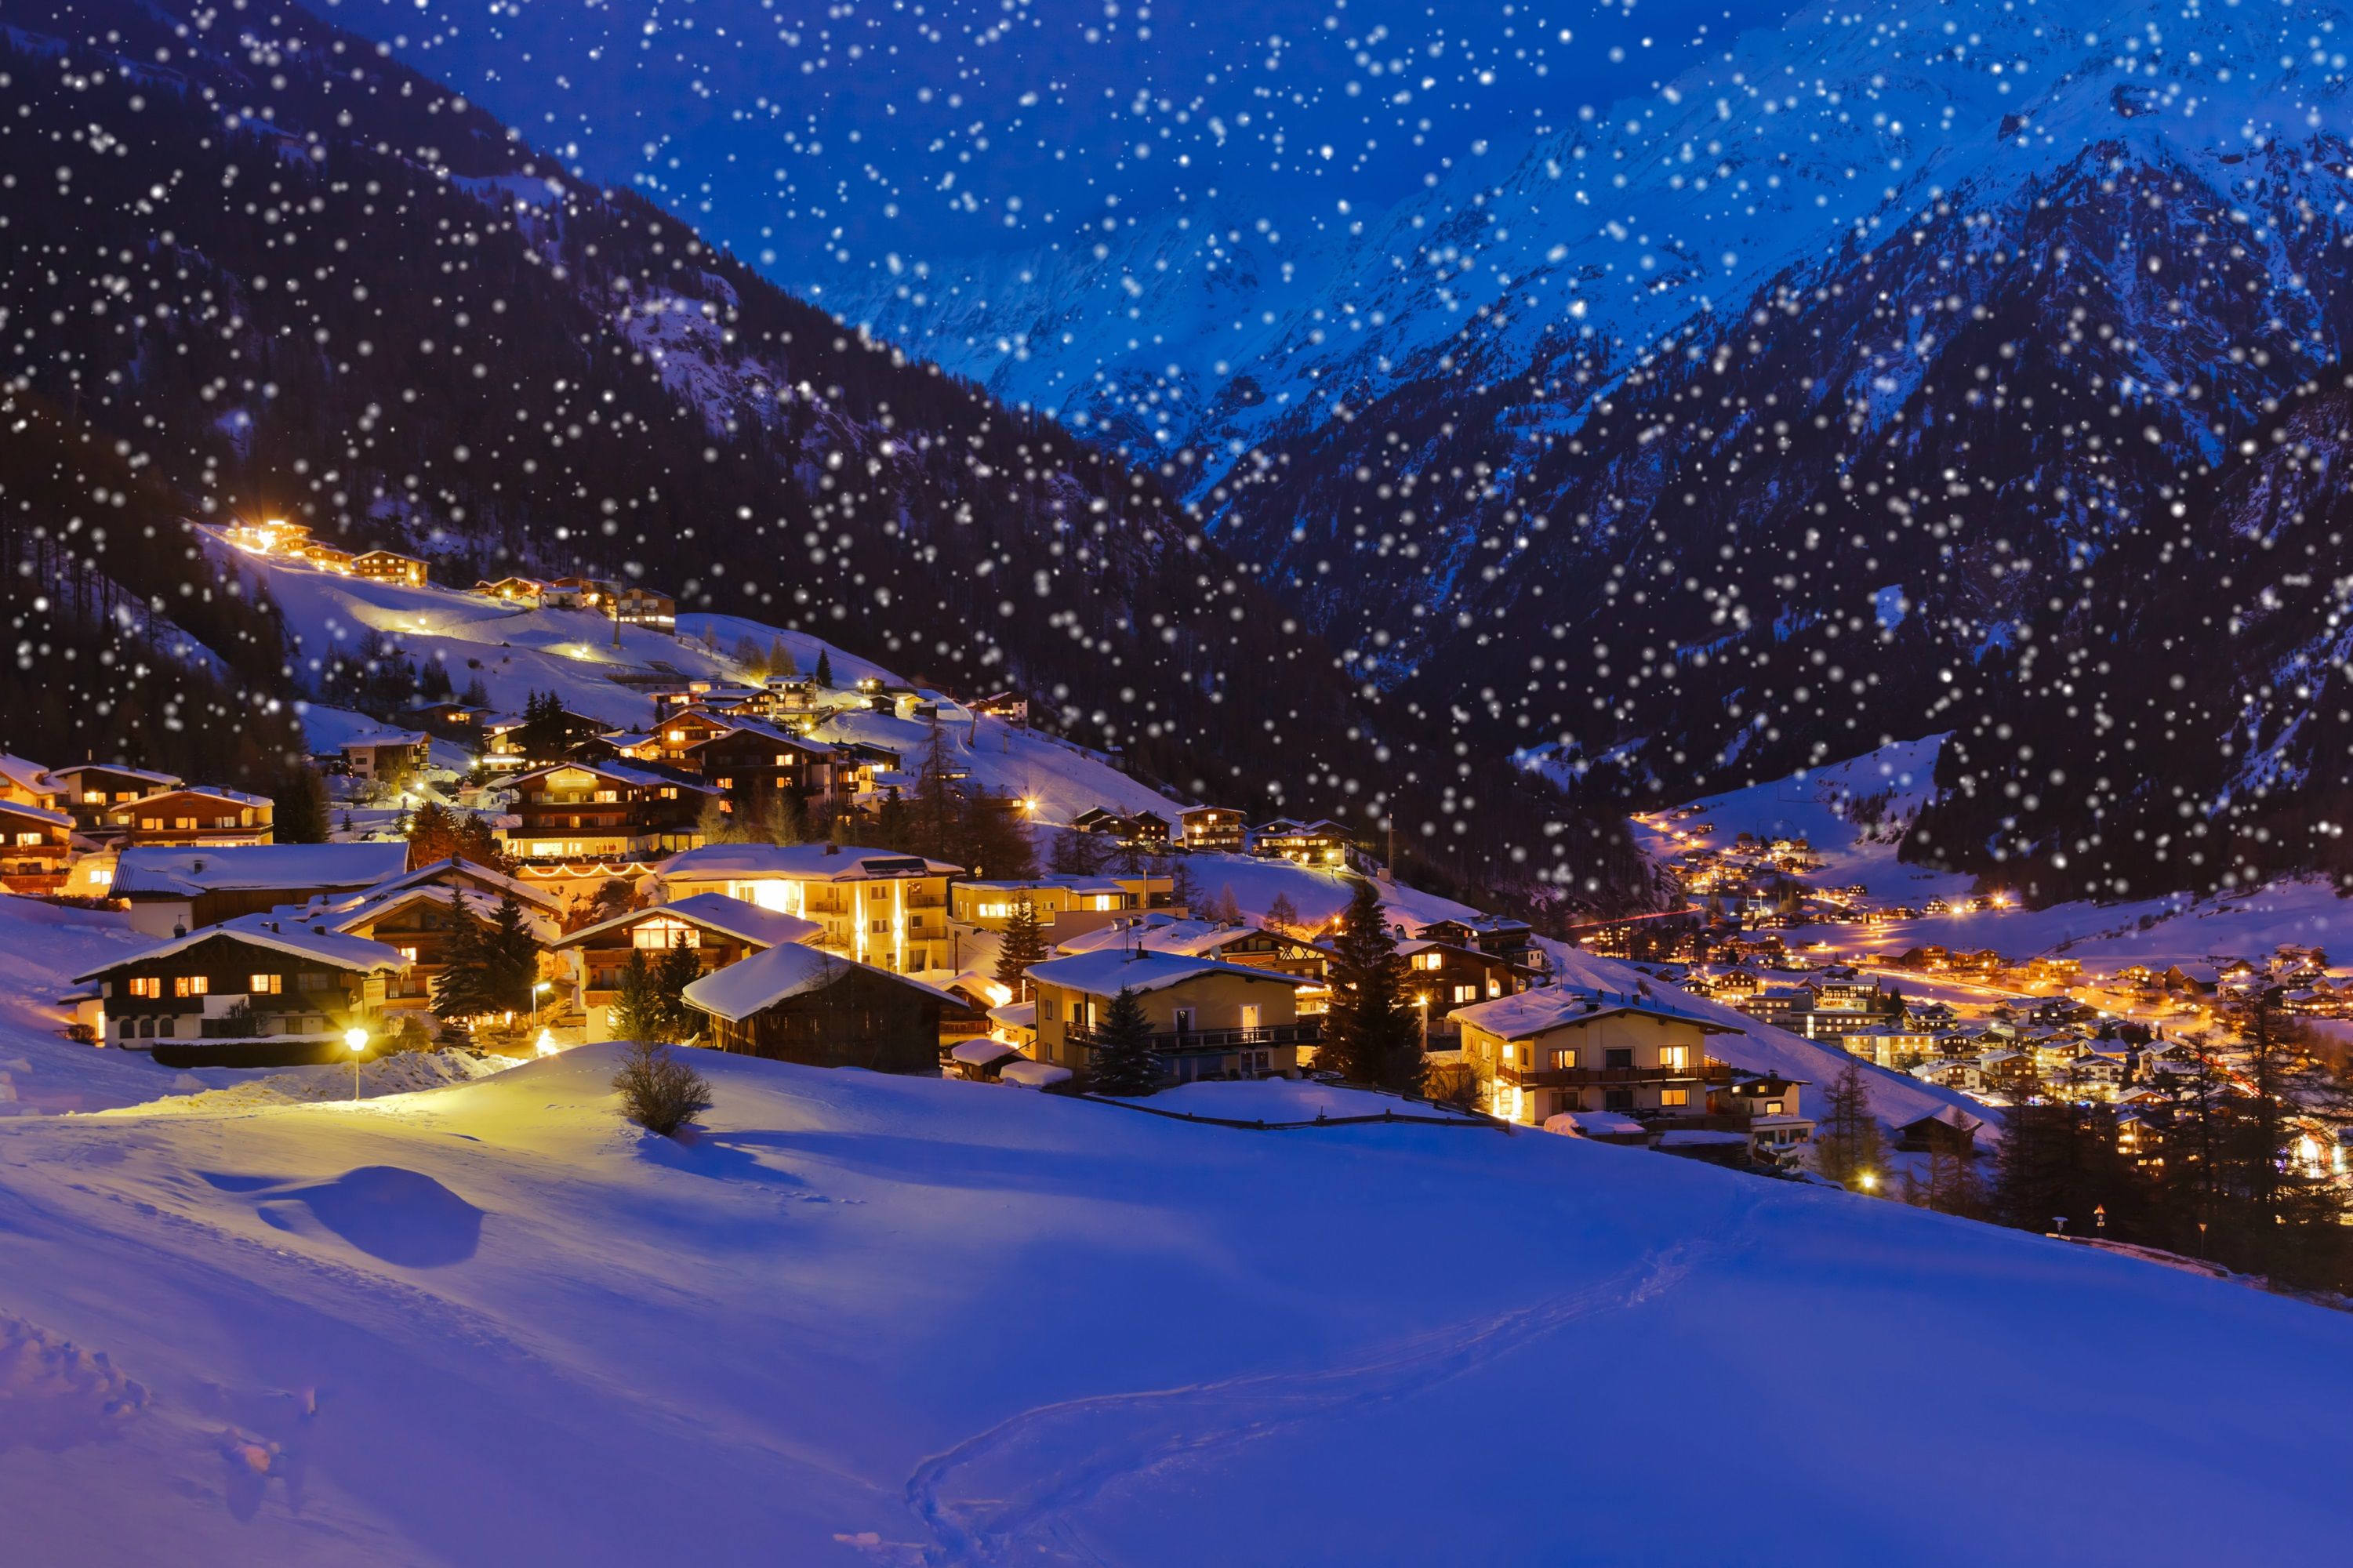 The Best Luxury Ski Resorts to Stay In This Winter